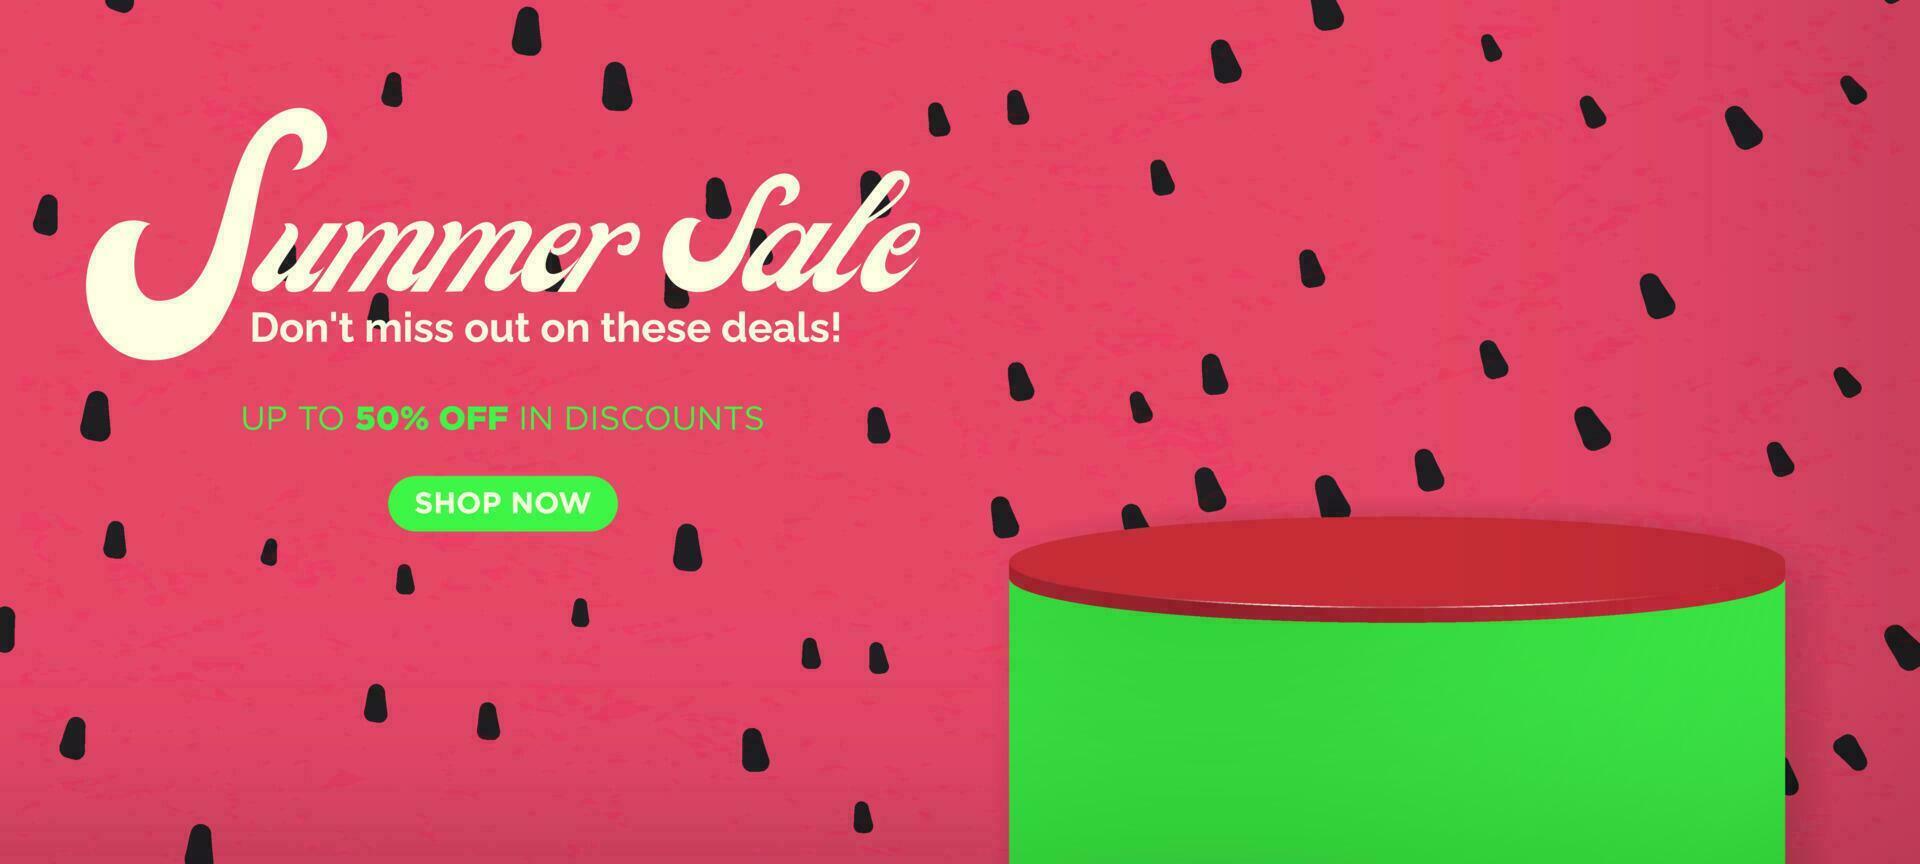 Summer Sale Watermelon Background with colorful product display cylindrical shape and shop now button. Fun and colorful summer advertising template. Vector Illustration. EPS 10.